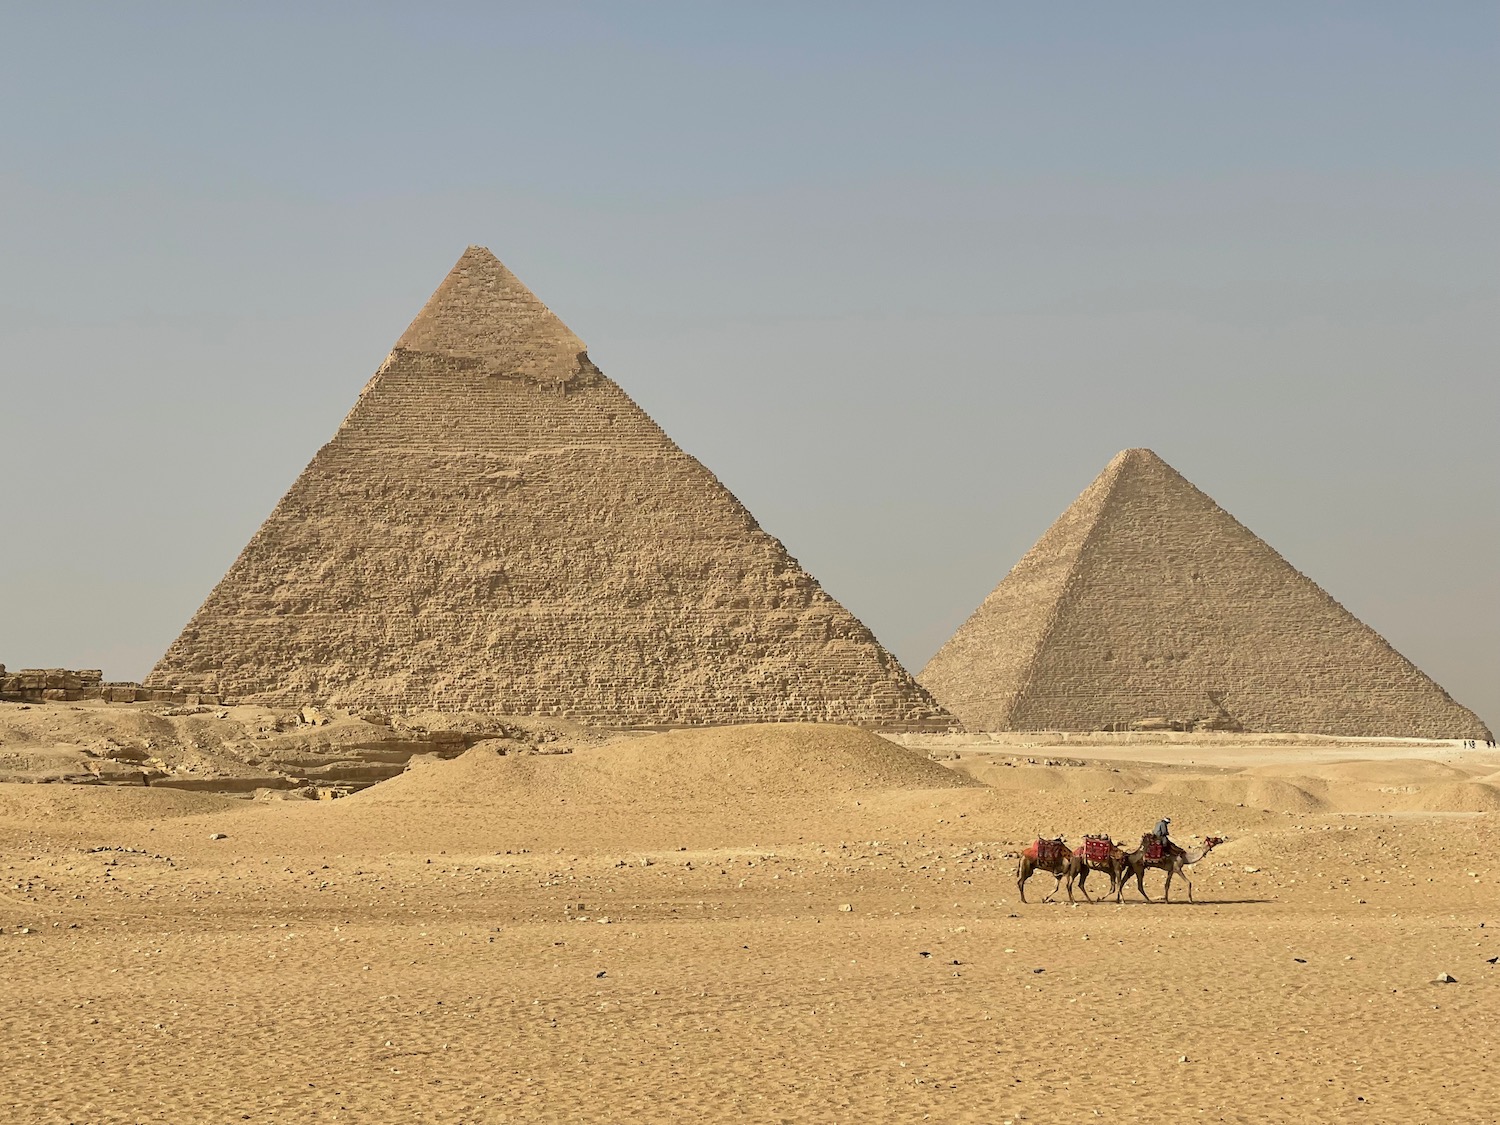 a group of pyramids in the desert